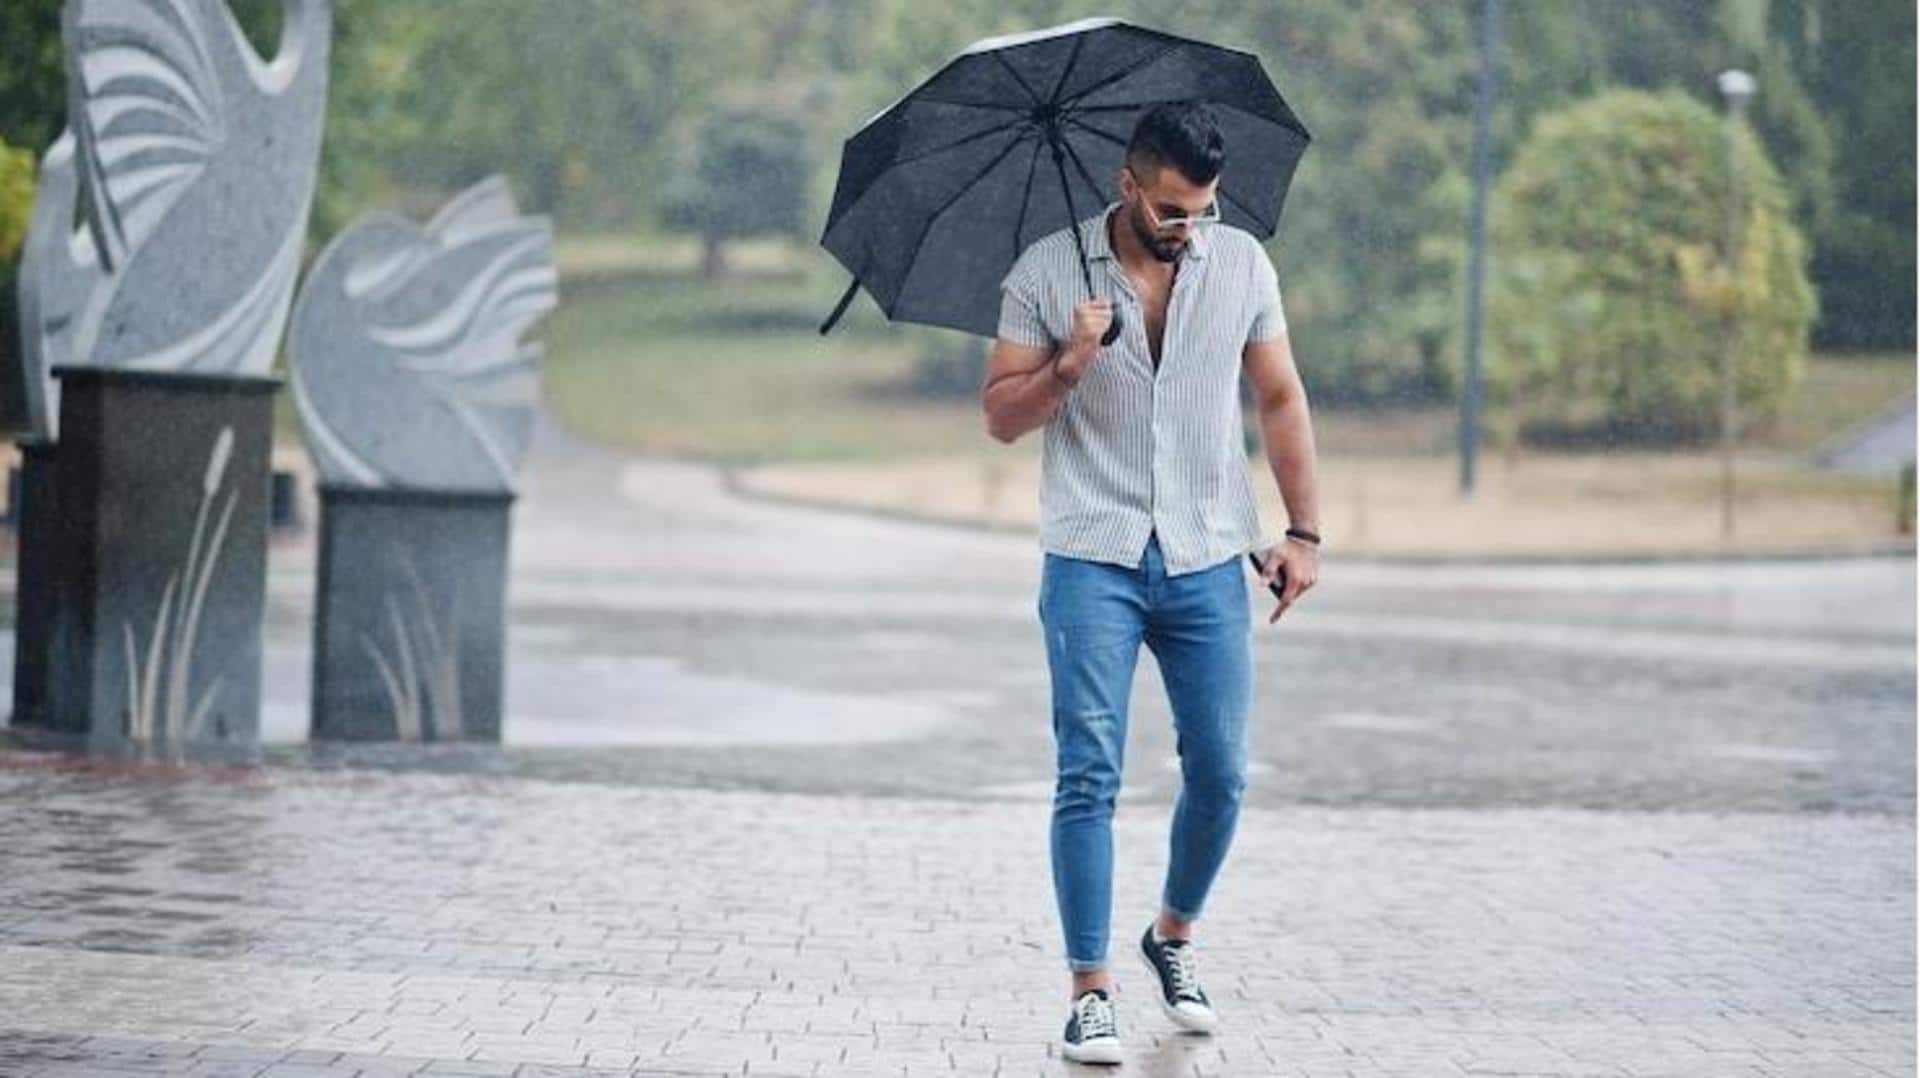 Practical fashion tips for men to enjoy monsoon in style